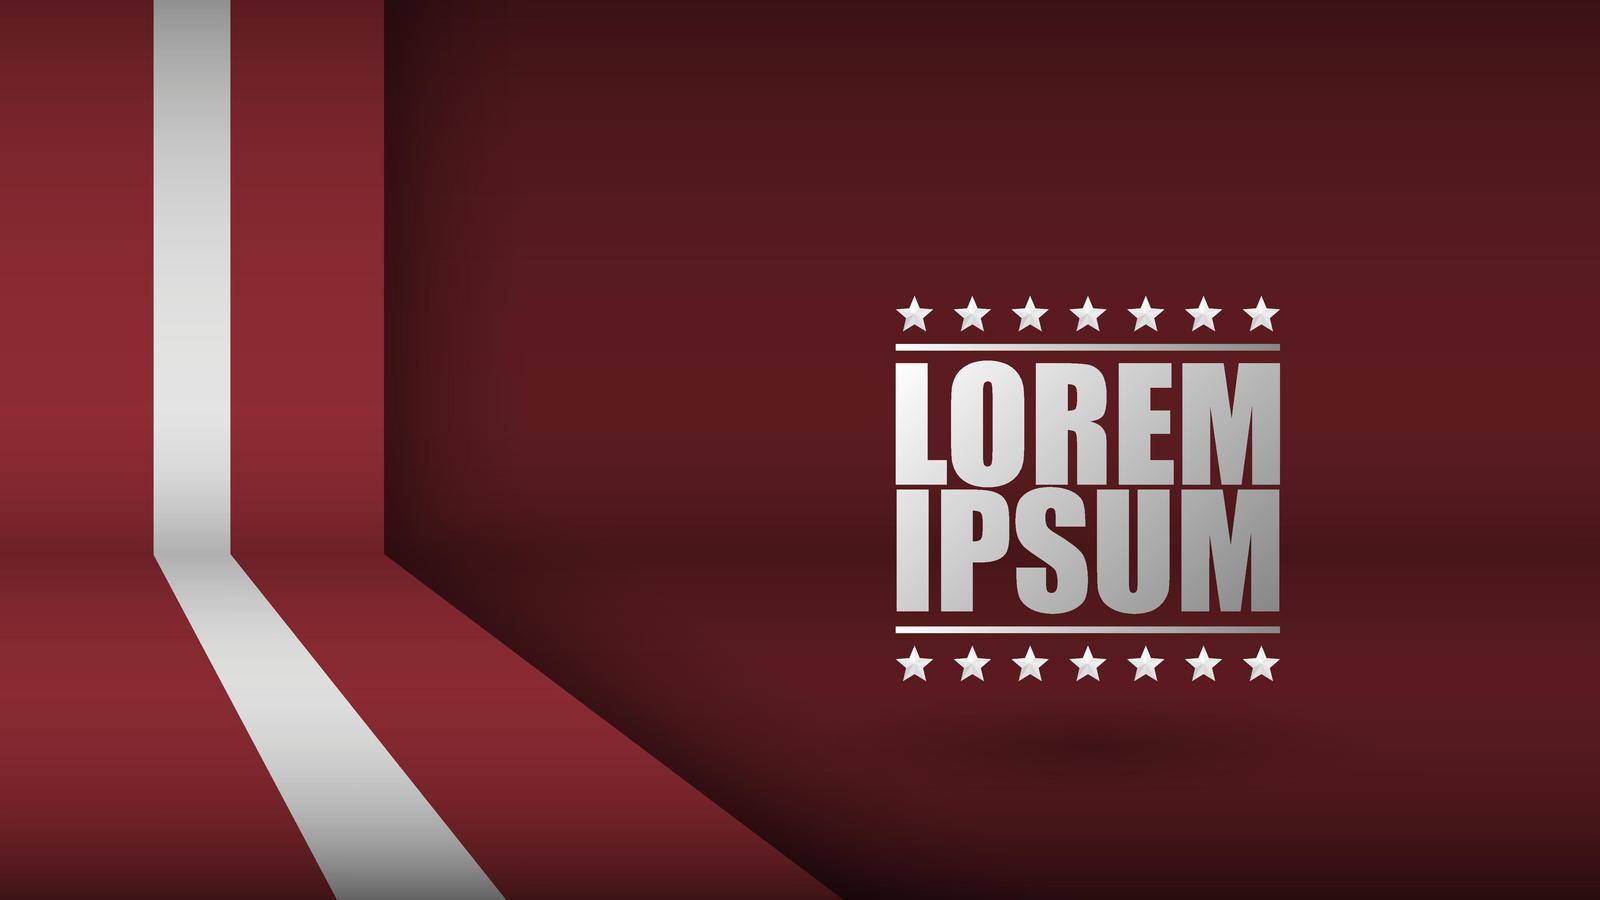 EPS10 Vector Patriotic Background with Latvia flag colors. An element of impact for the use you want to make of it.